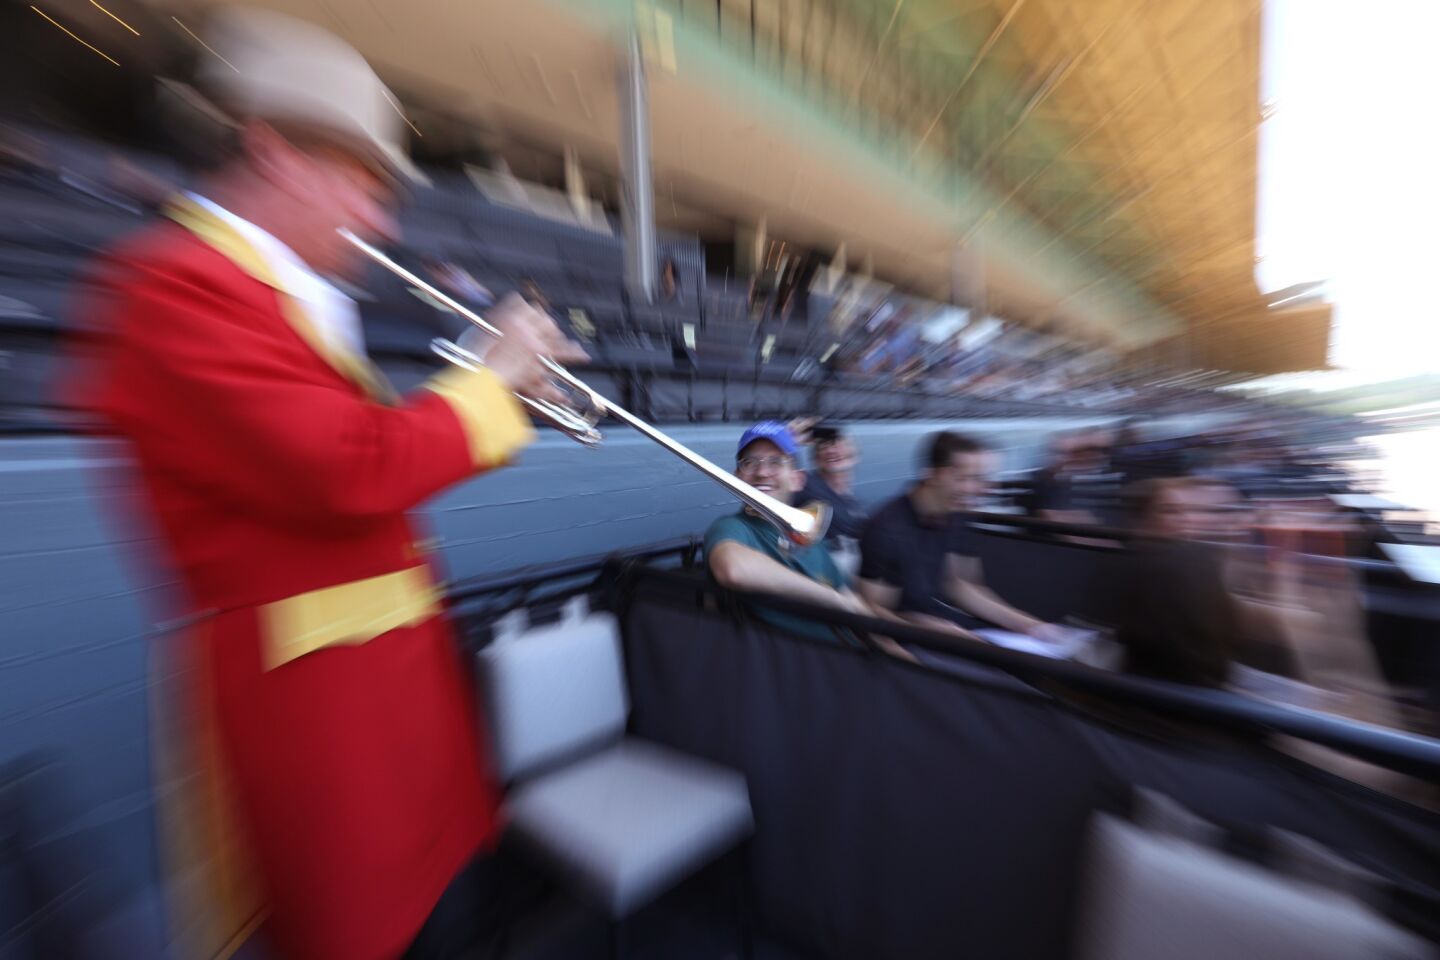 Bugler Jay Cohen, 63, plays for the fans during the final day of the season at Santa Anita Park in Arcadia on June 23.